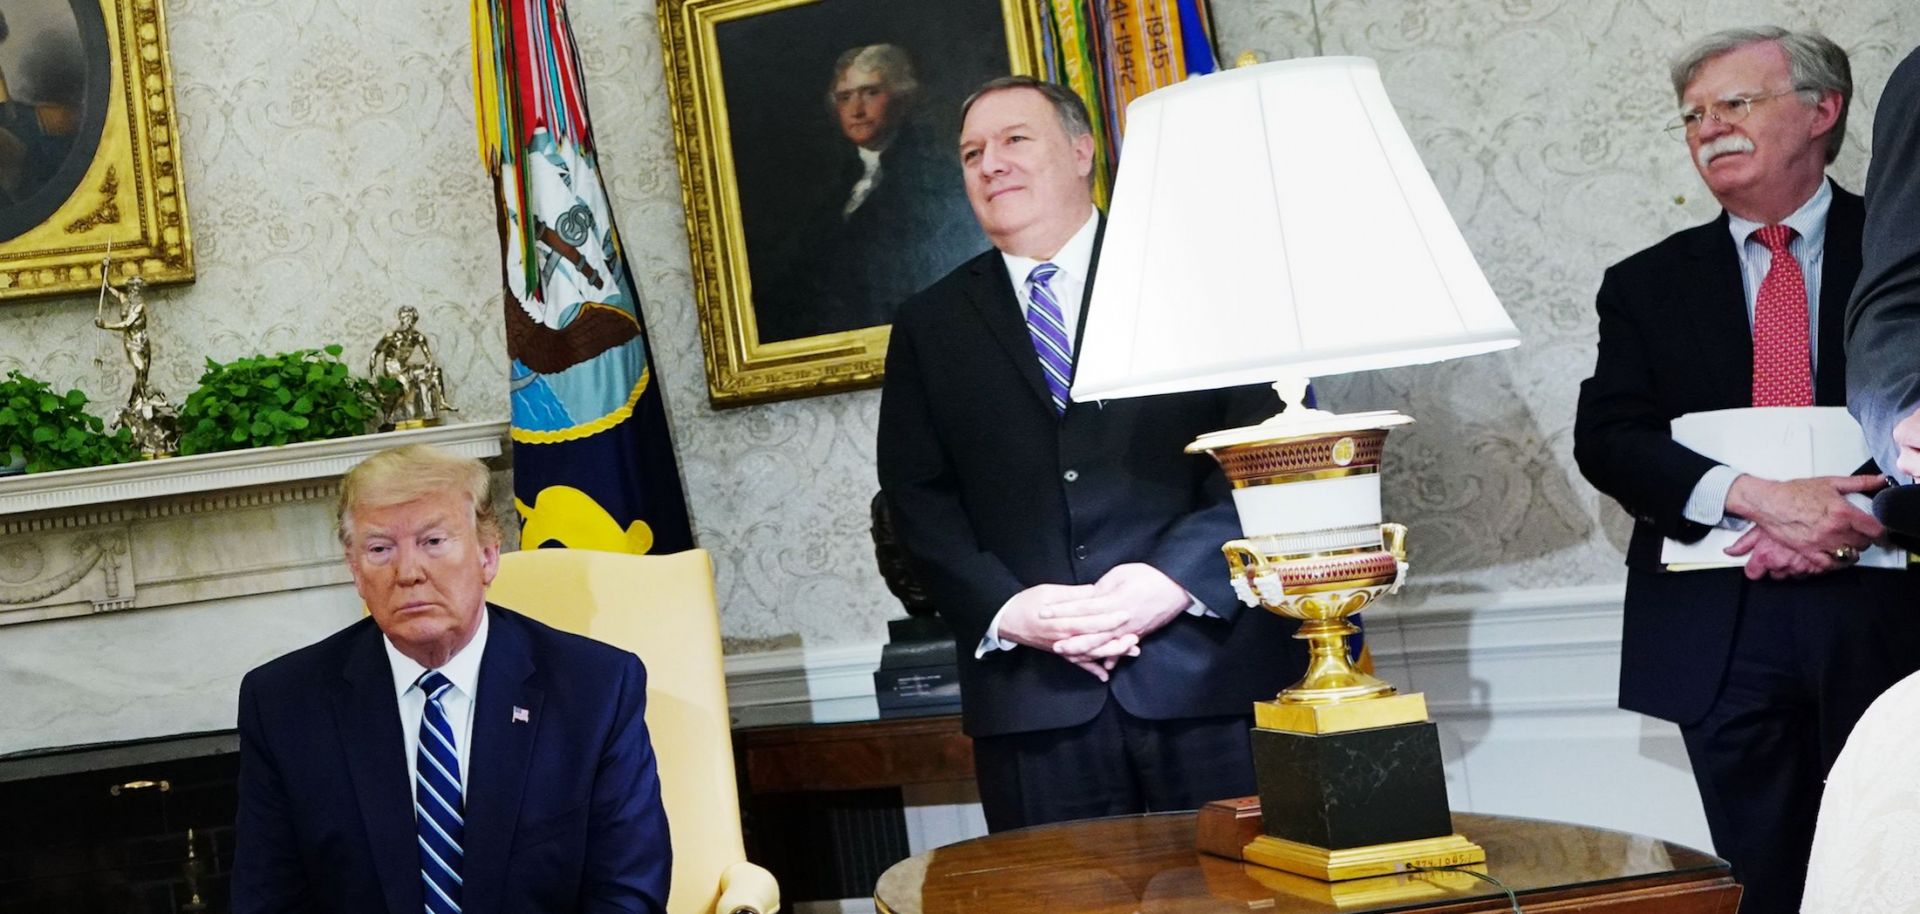 U.S. President Donald Trump, Secretary of State Mike Pompeo and national security adviser John Bolton, left to right, are pictured in the Oval Office of the White House on June 20, 2019.